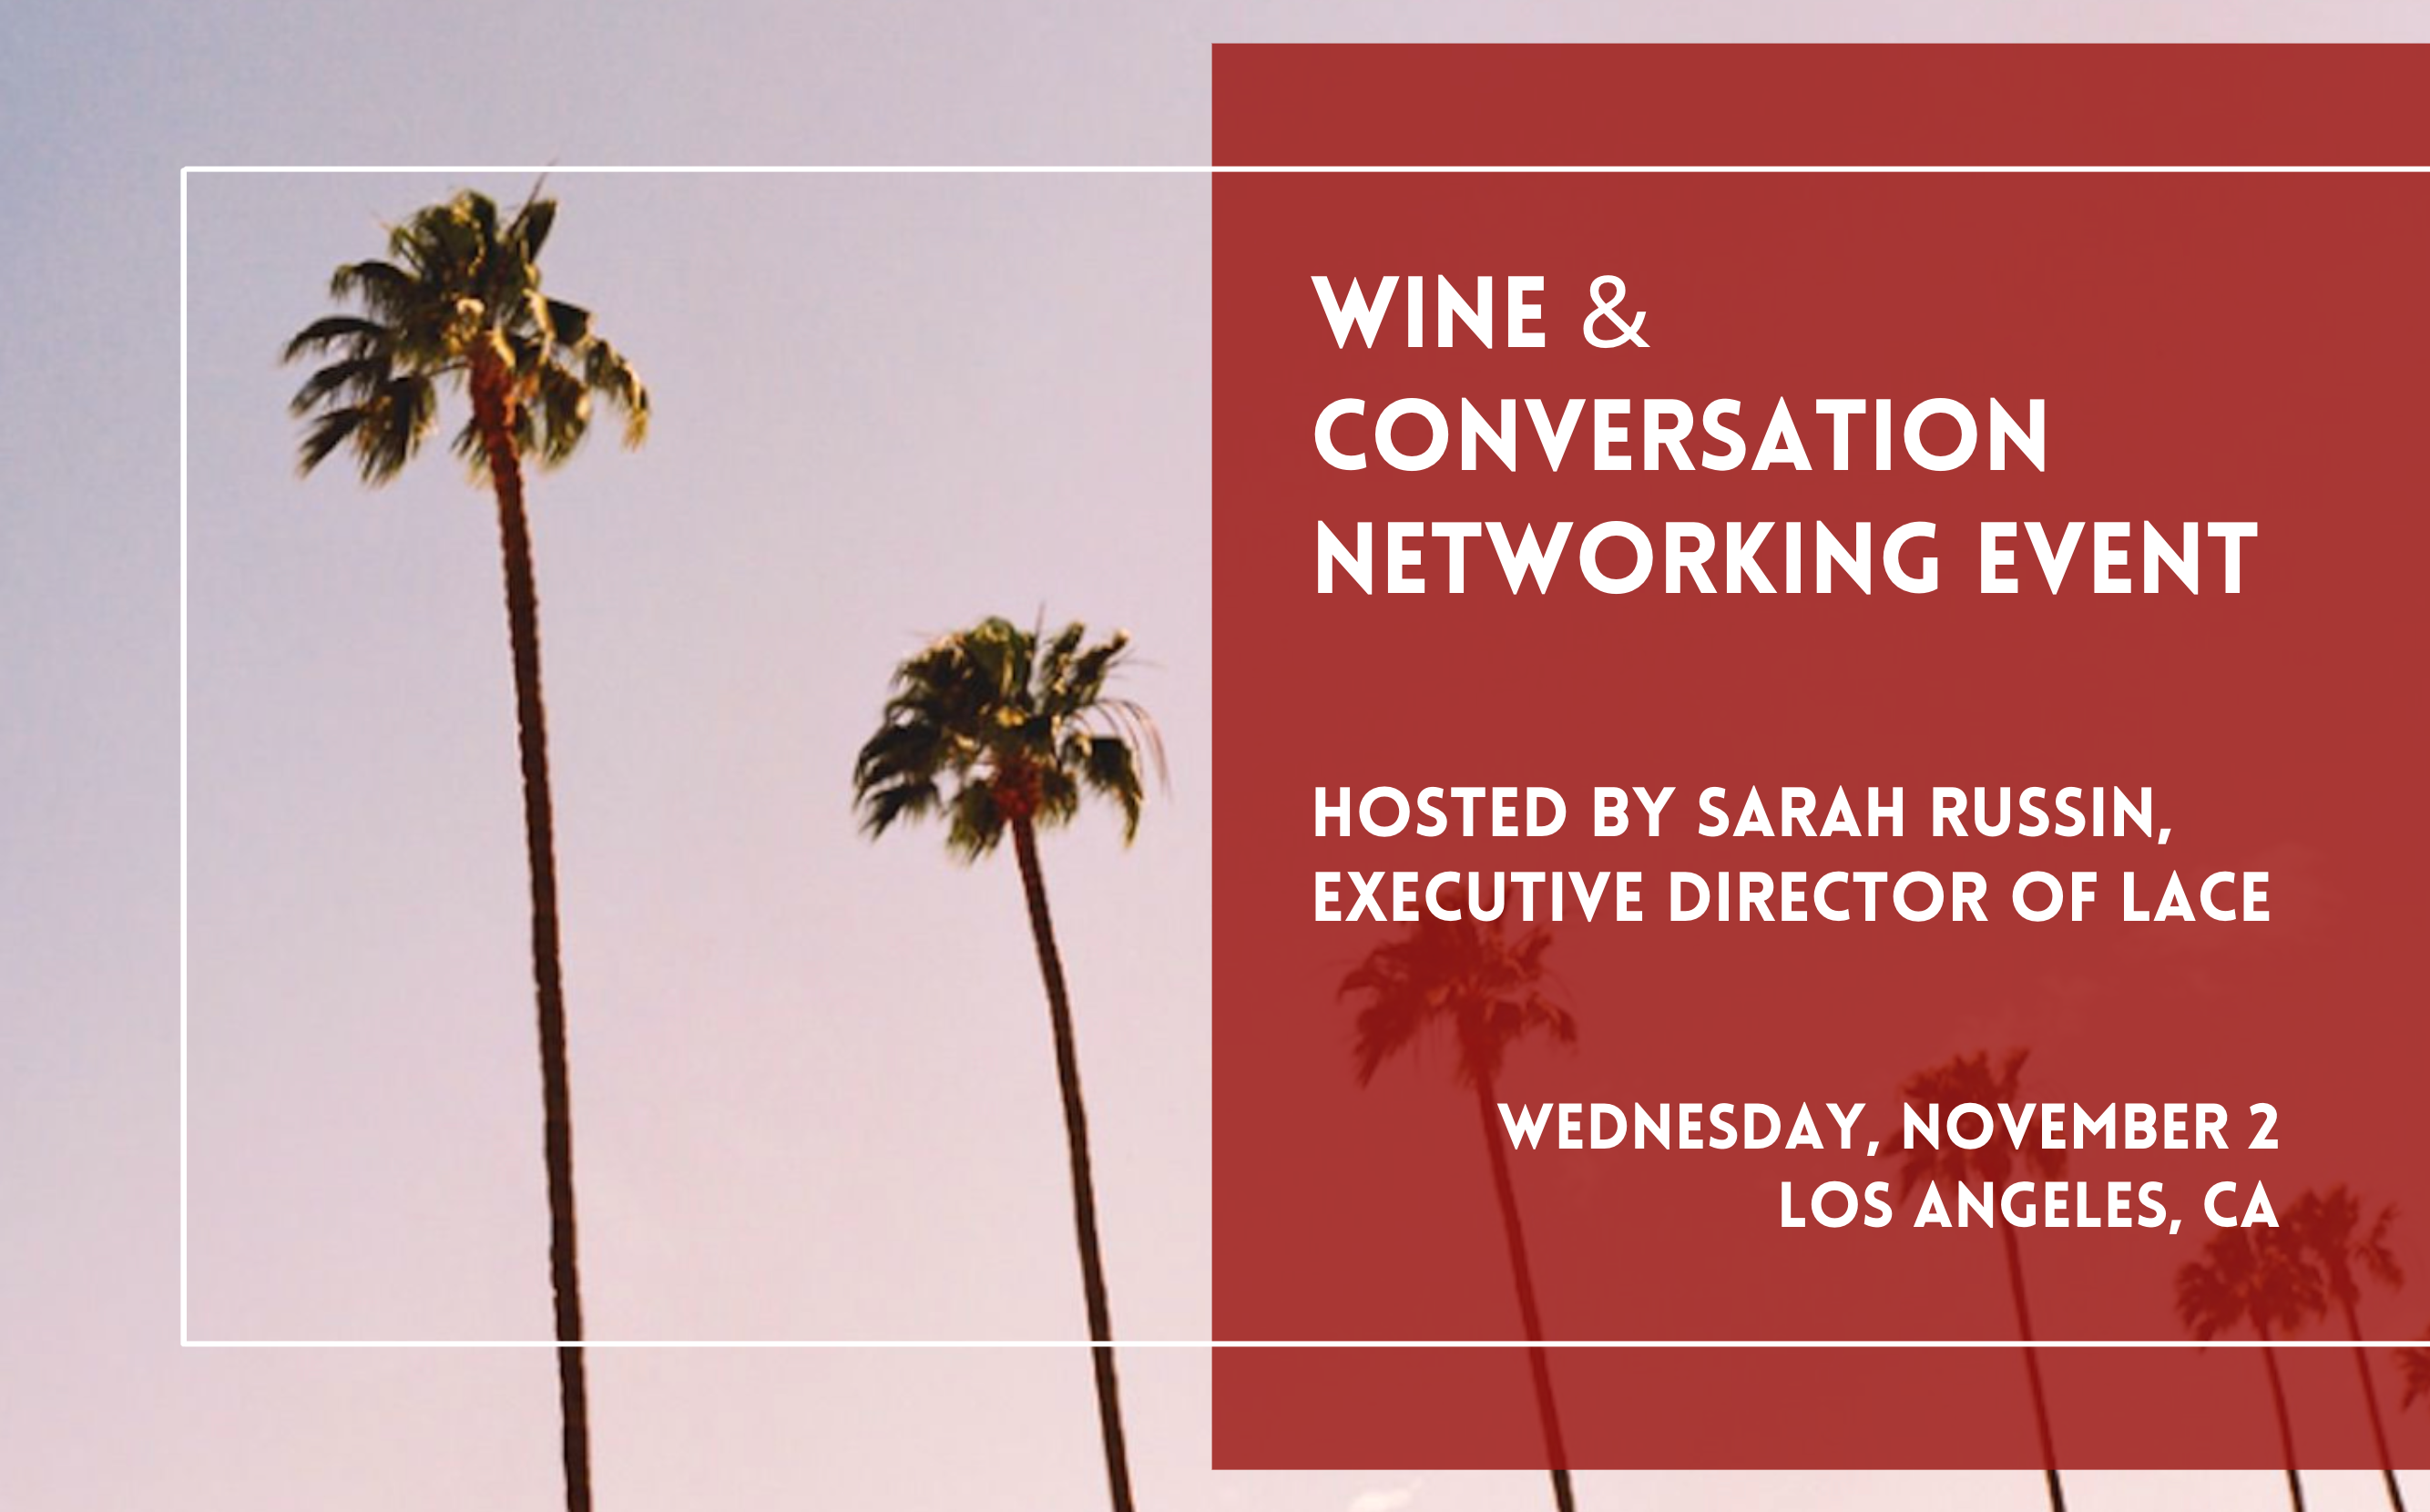 Los Angeles, CA | Wine & Conversation Networking Event, with Sarah Russin, Executive Director of LACE